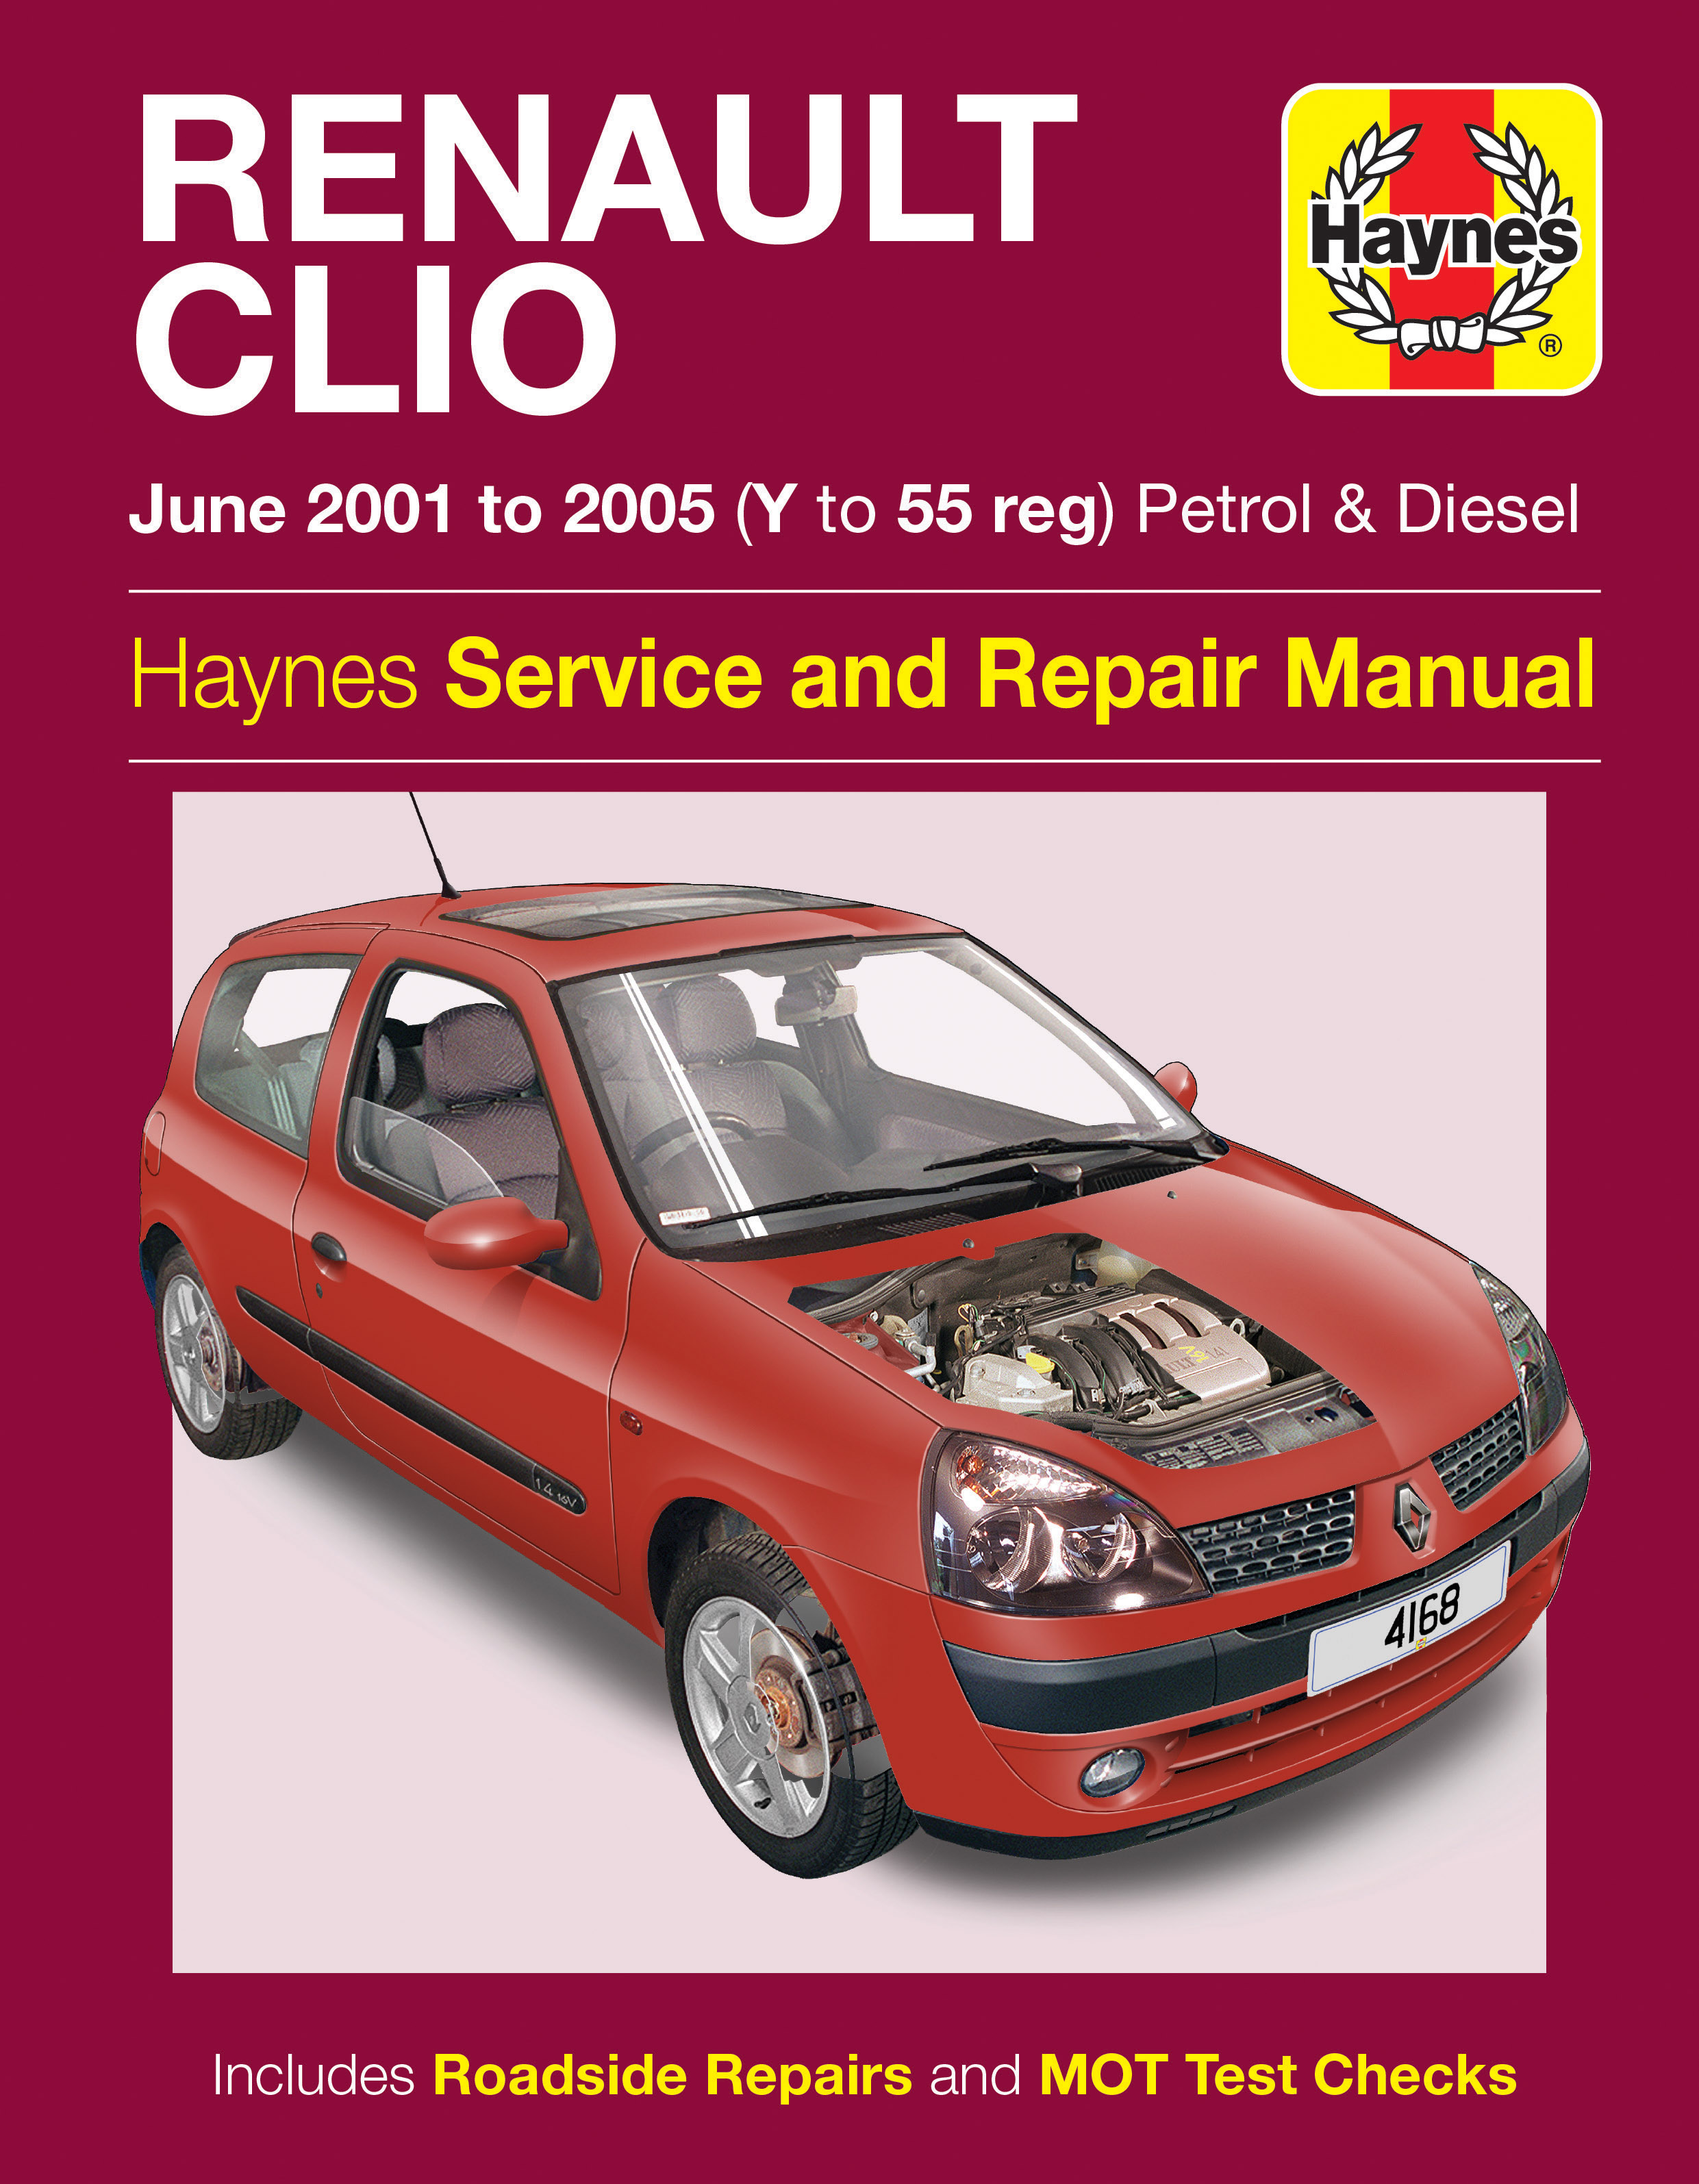 How to buy a Renault Clio II Phase 2 (2001-2005 models)